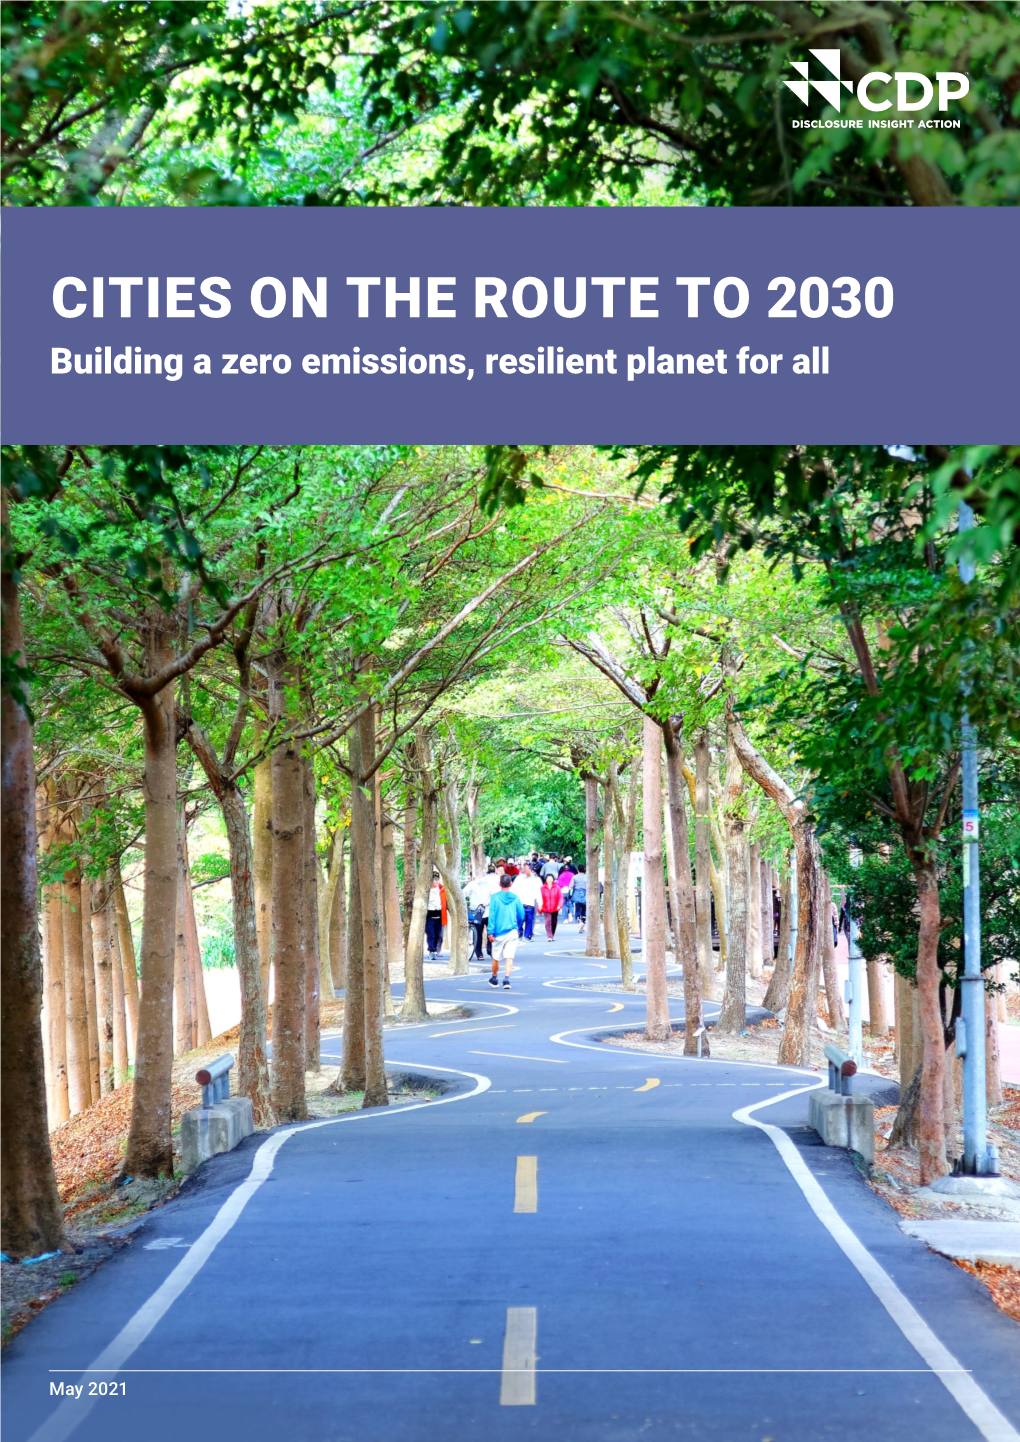 CITIES on the ROUTE to 2030 Building a Zero Emissions, Resilient Planet for All